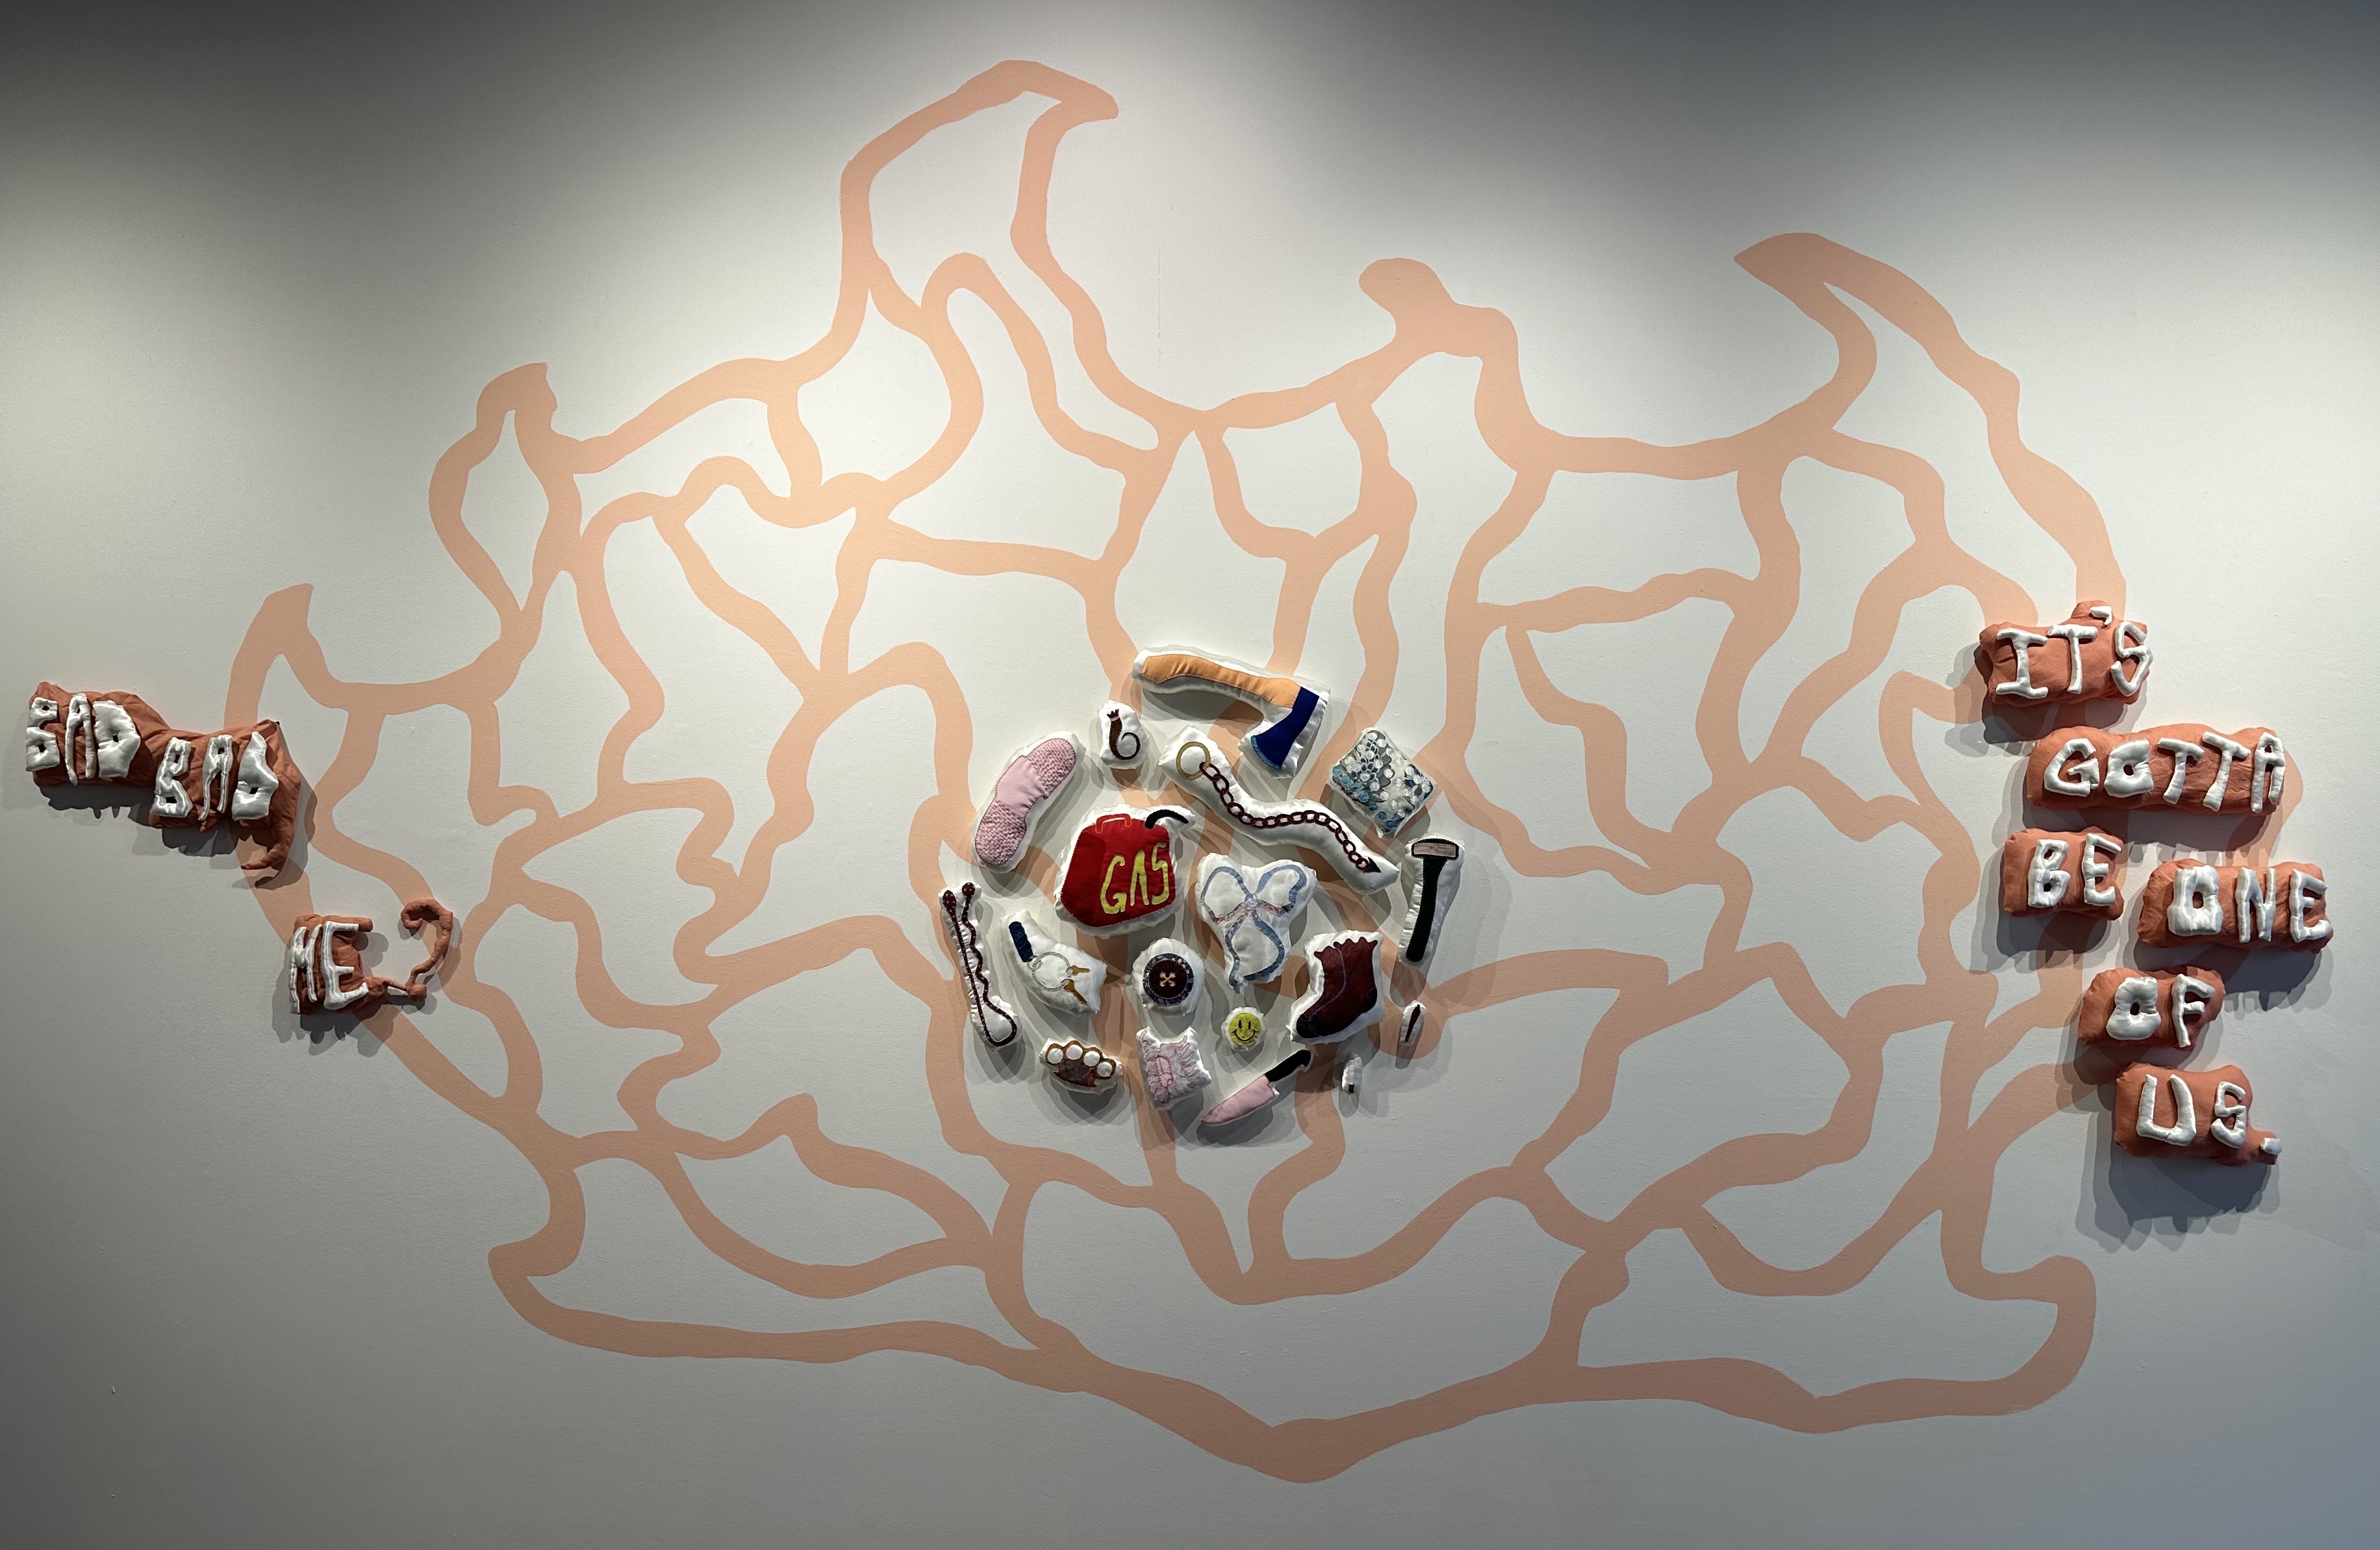 Artwork by Melanie Dowding: an orange-red, abstract painting on a white gallery wall. Several fabric sculptures are installed over the mural.